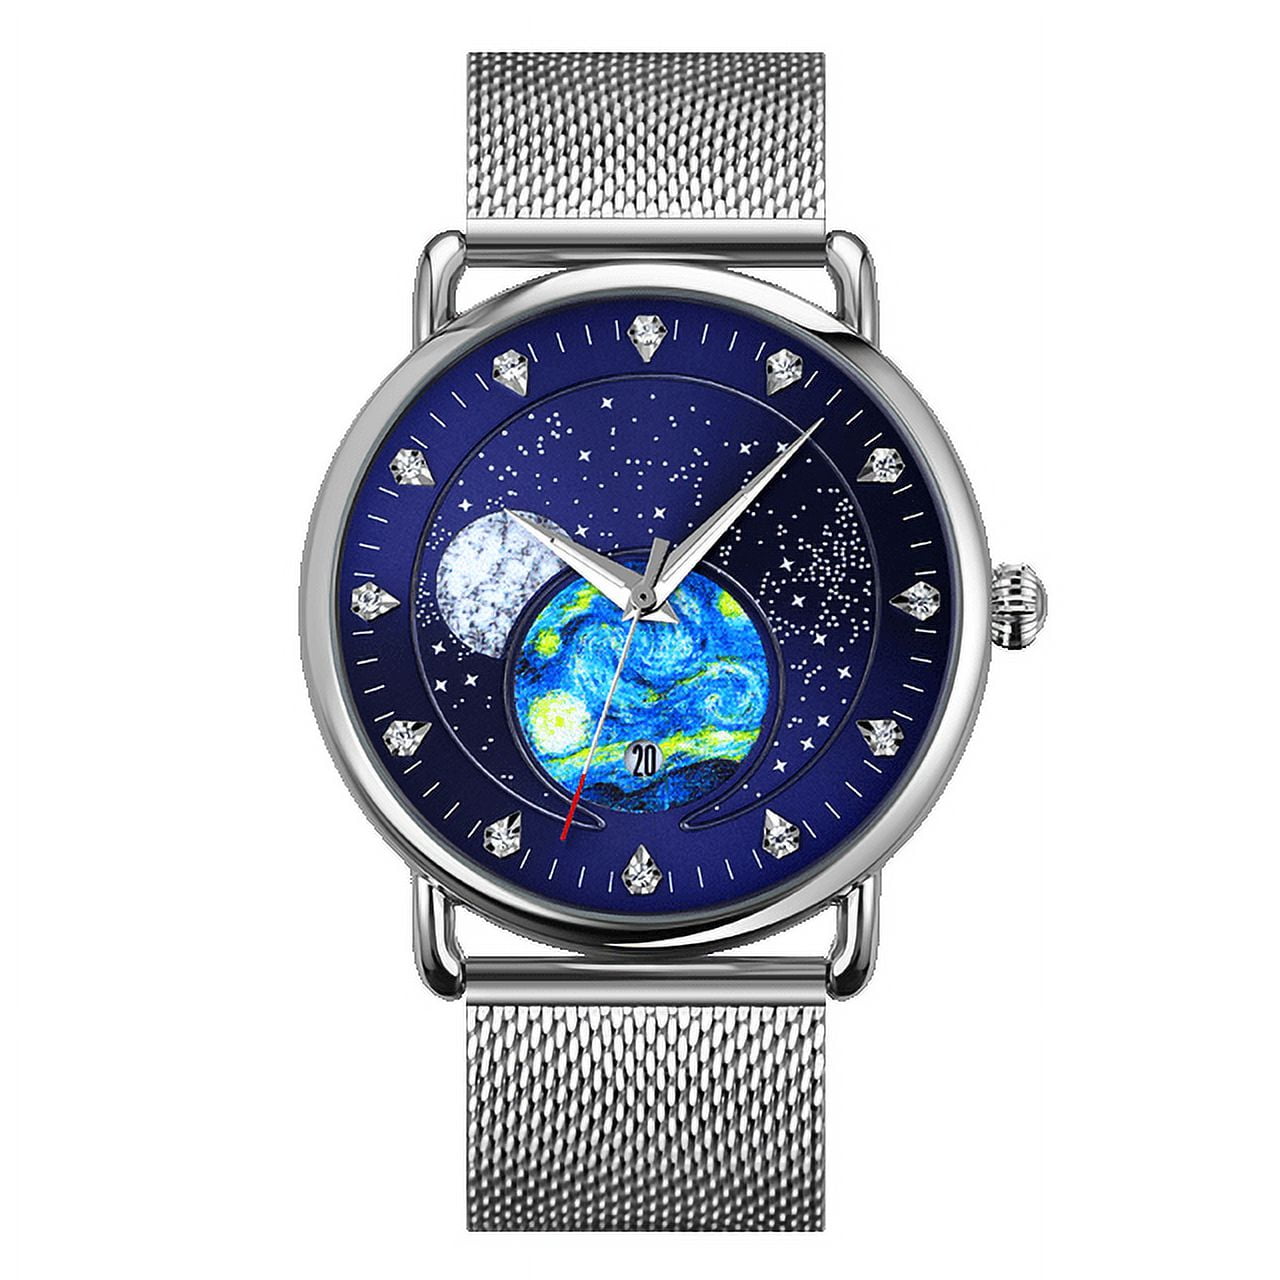 Wrist Watches Picture of the Van Gogh, Women's Wrist Watches, Watch the  Starry Night, Handmade Watches, Men's Watch, Watches Art Paintings - Etsy